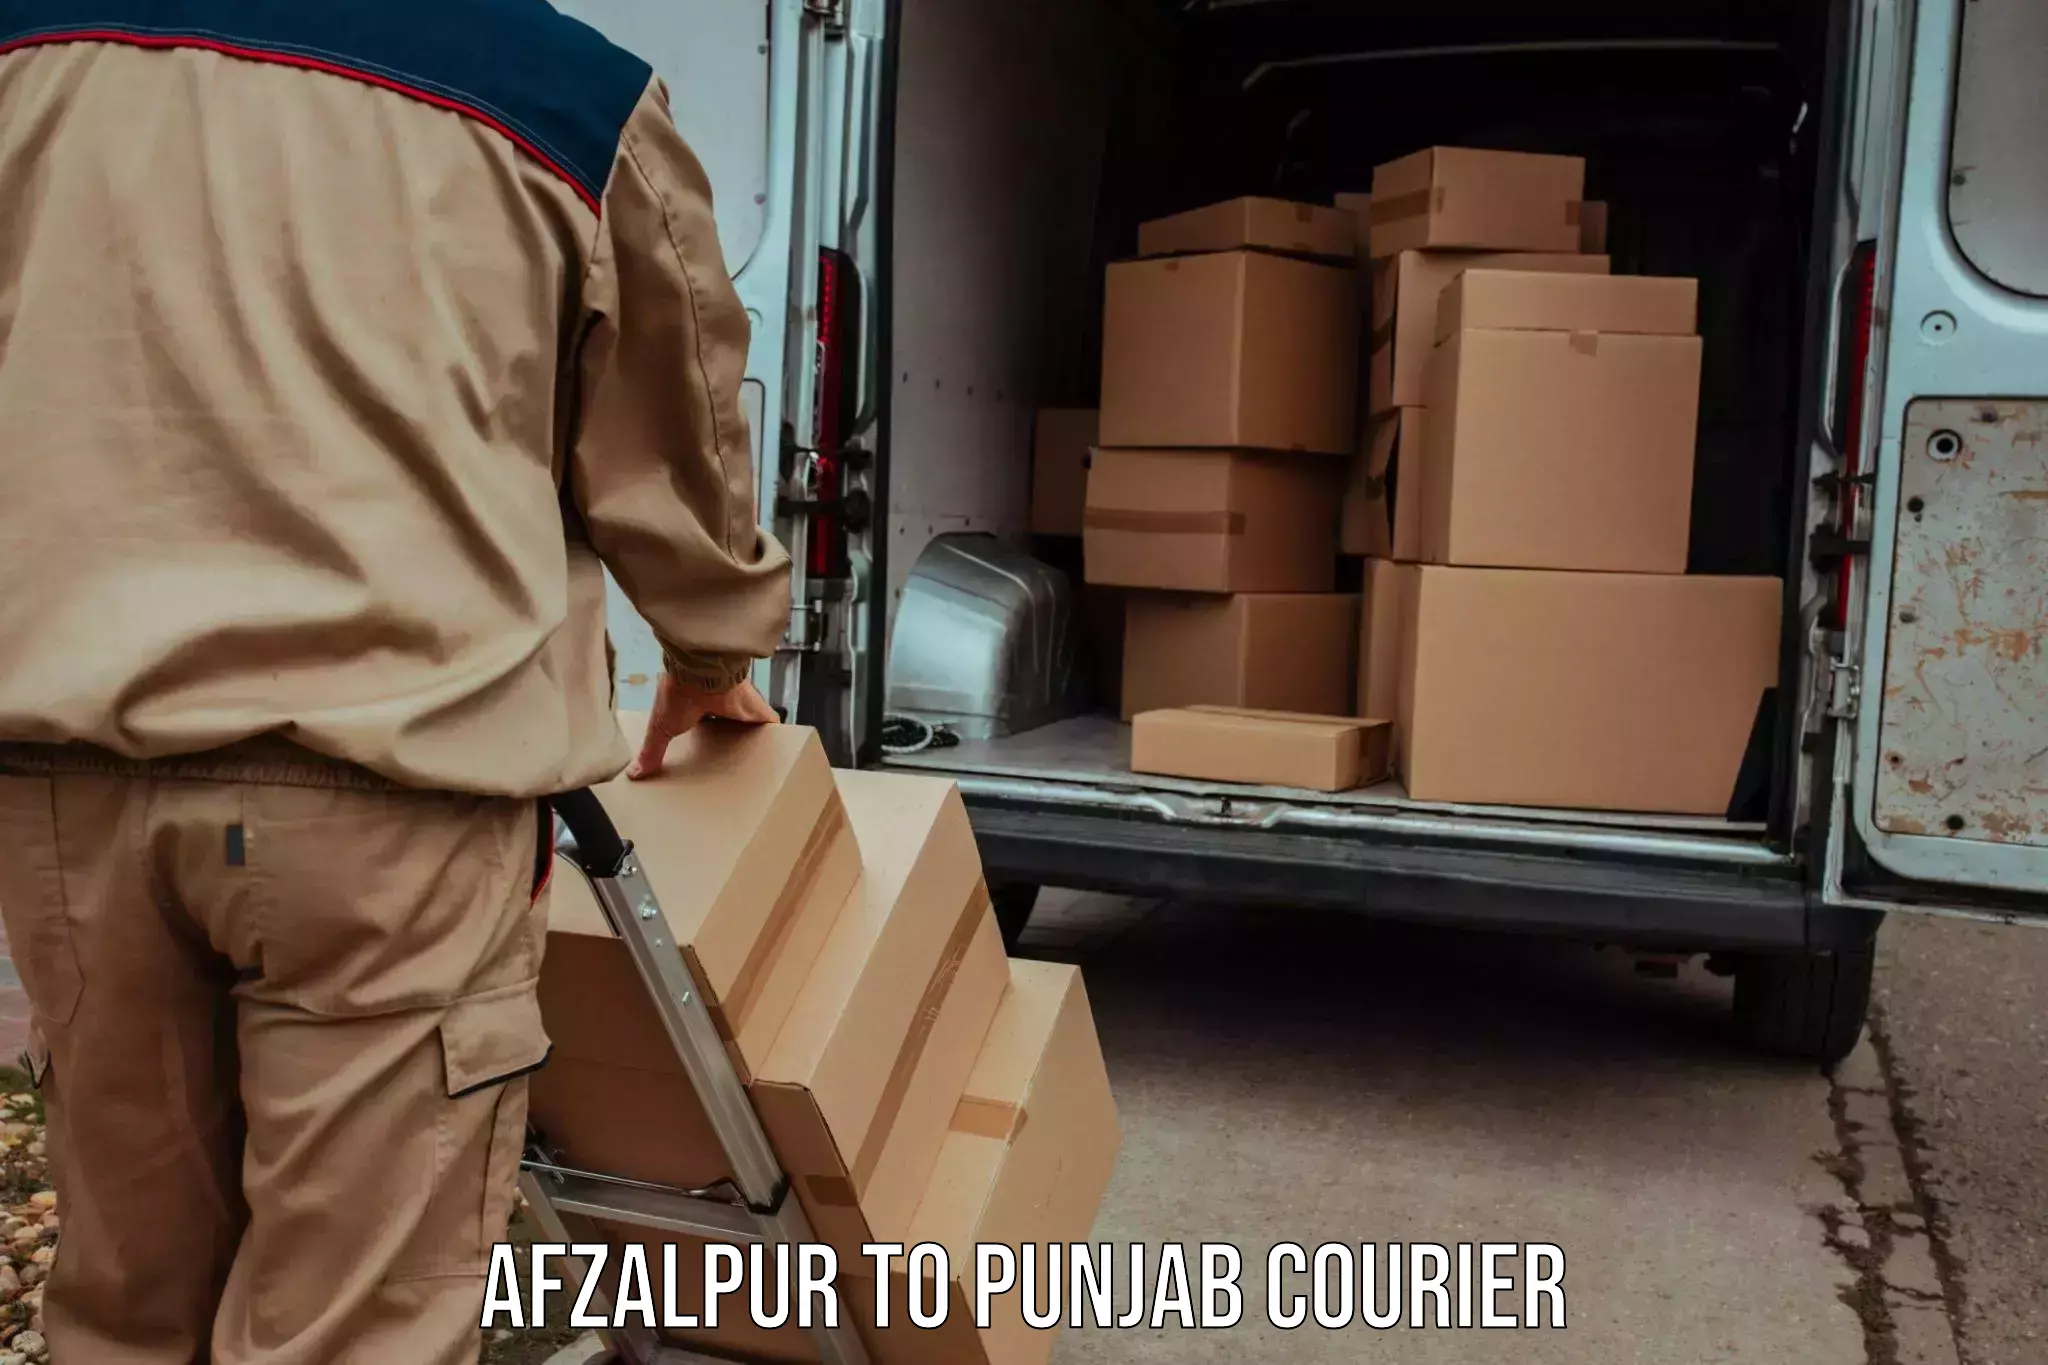 Next-day delivery options Afzalpur to Punjab